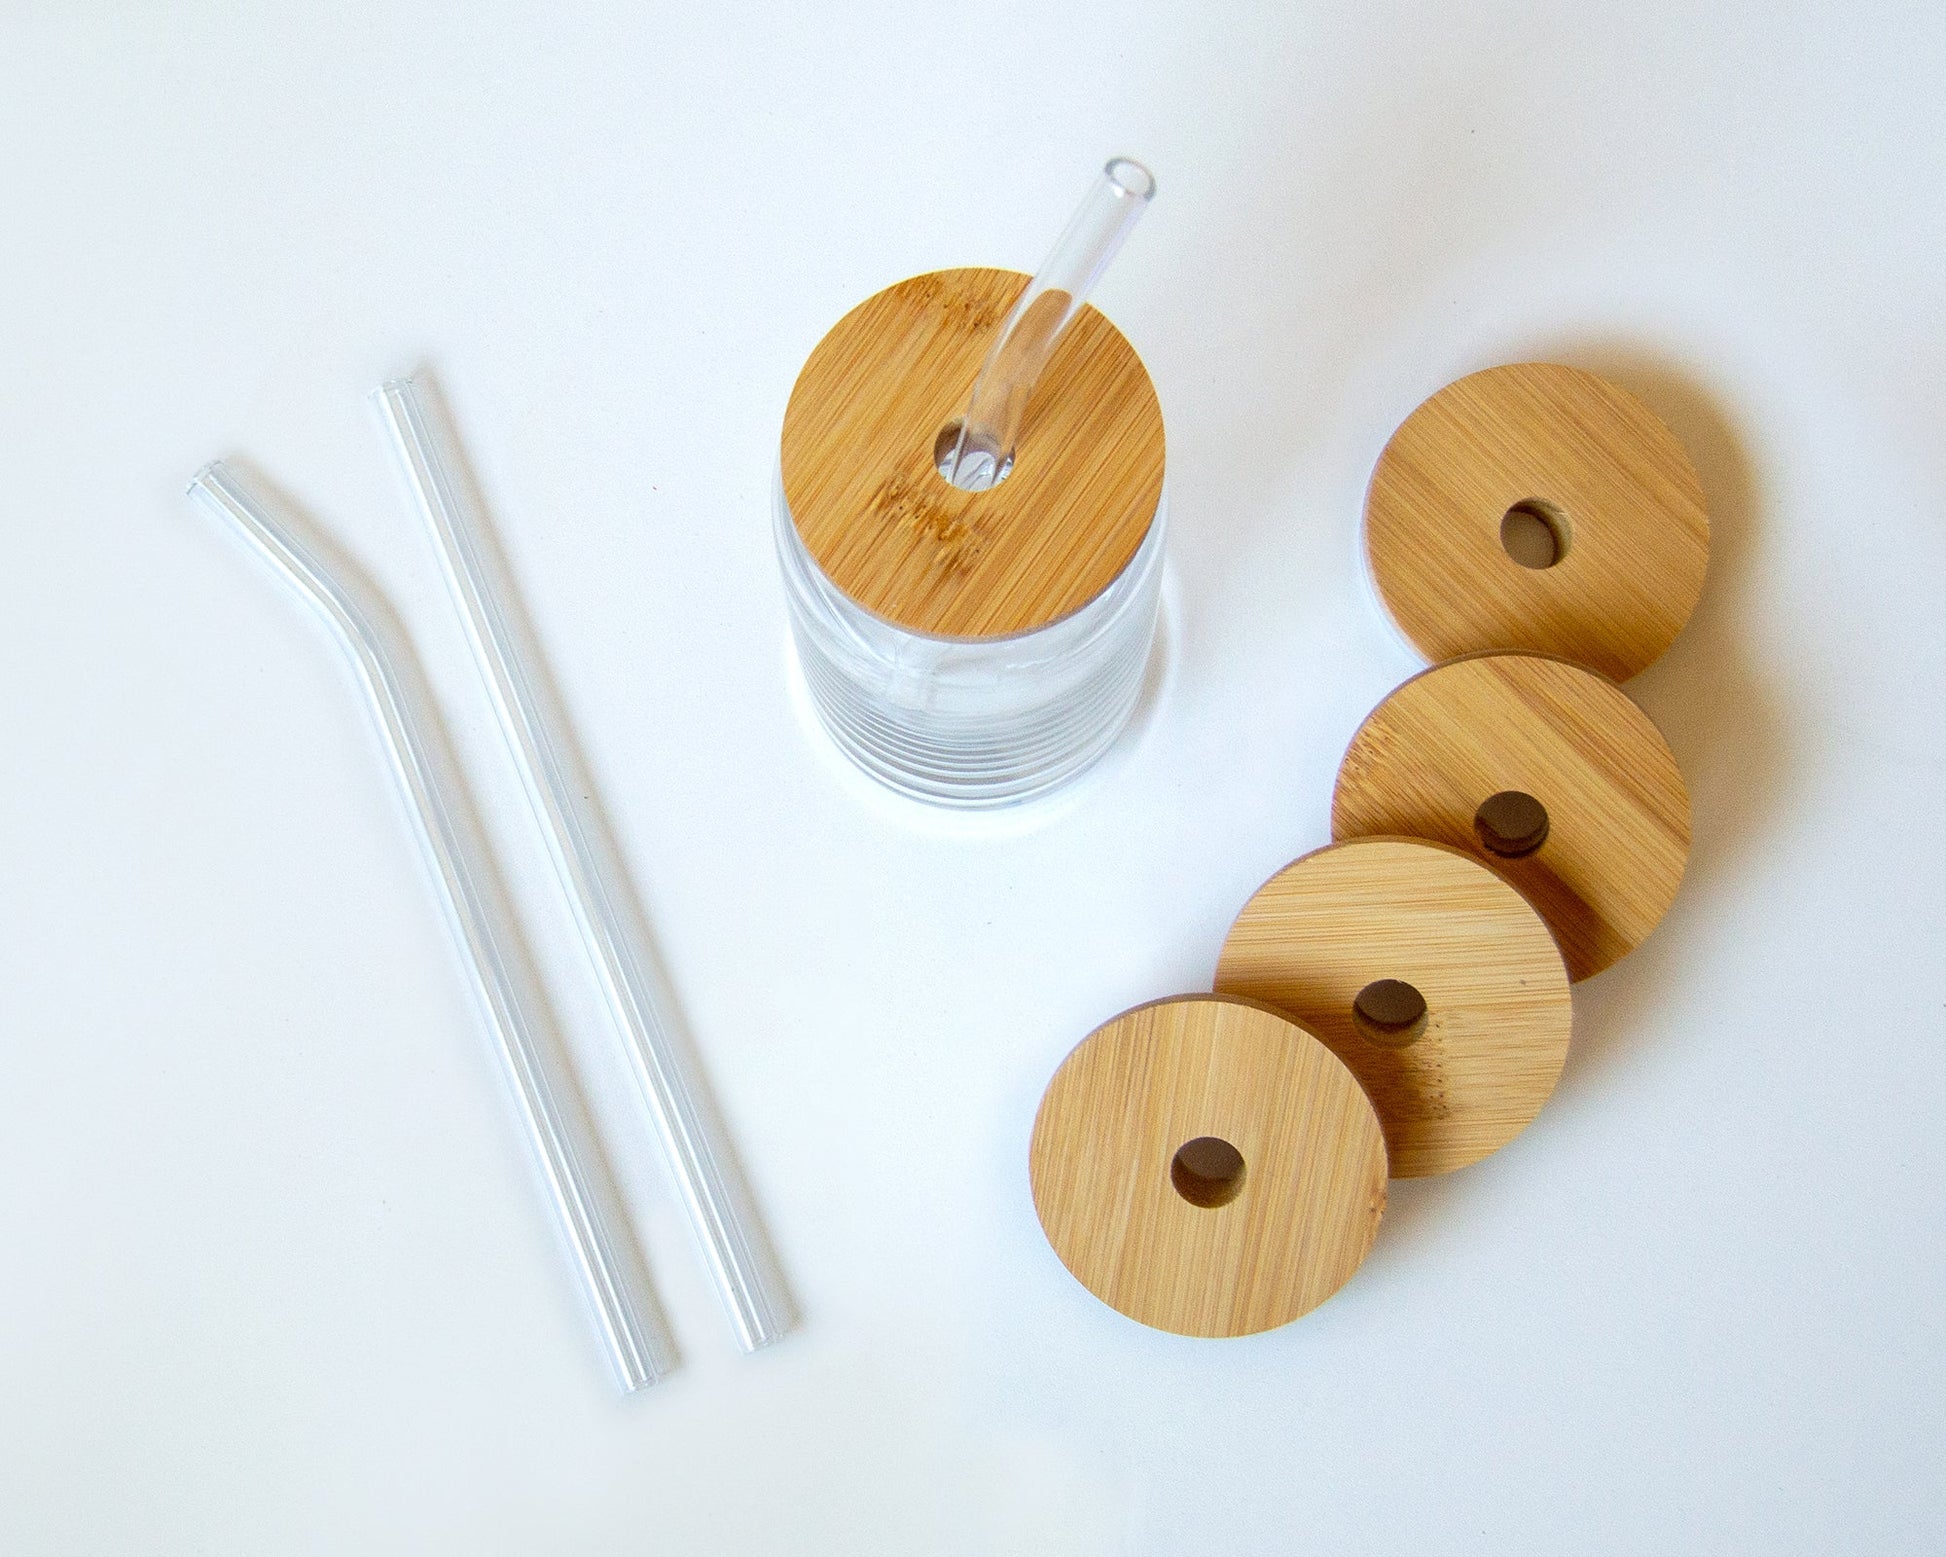 Bamboo Lid and Glass Straw for Can Glasses – Carver Junk Company